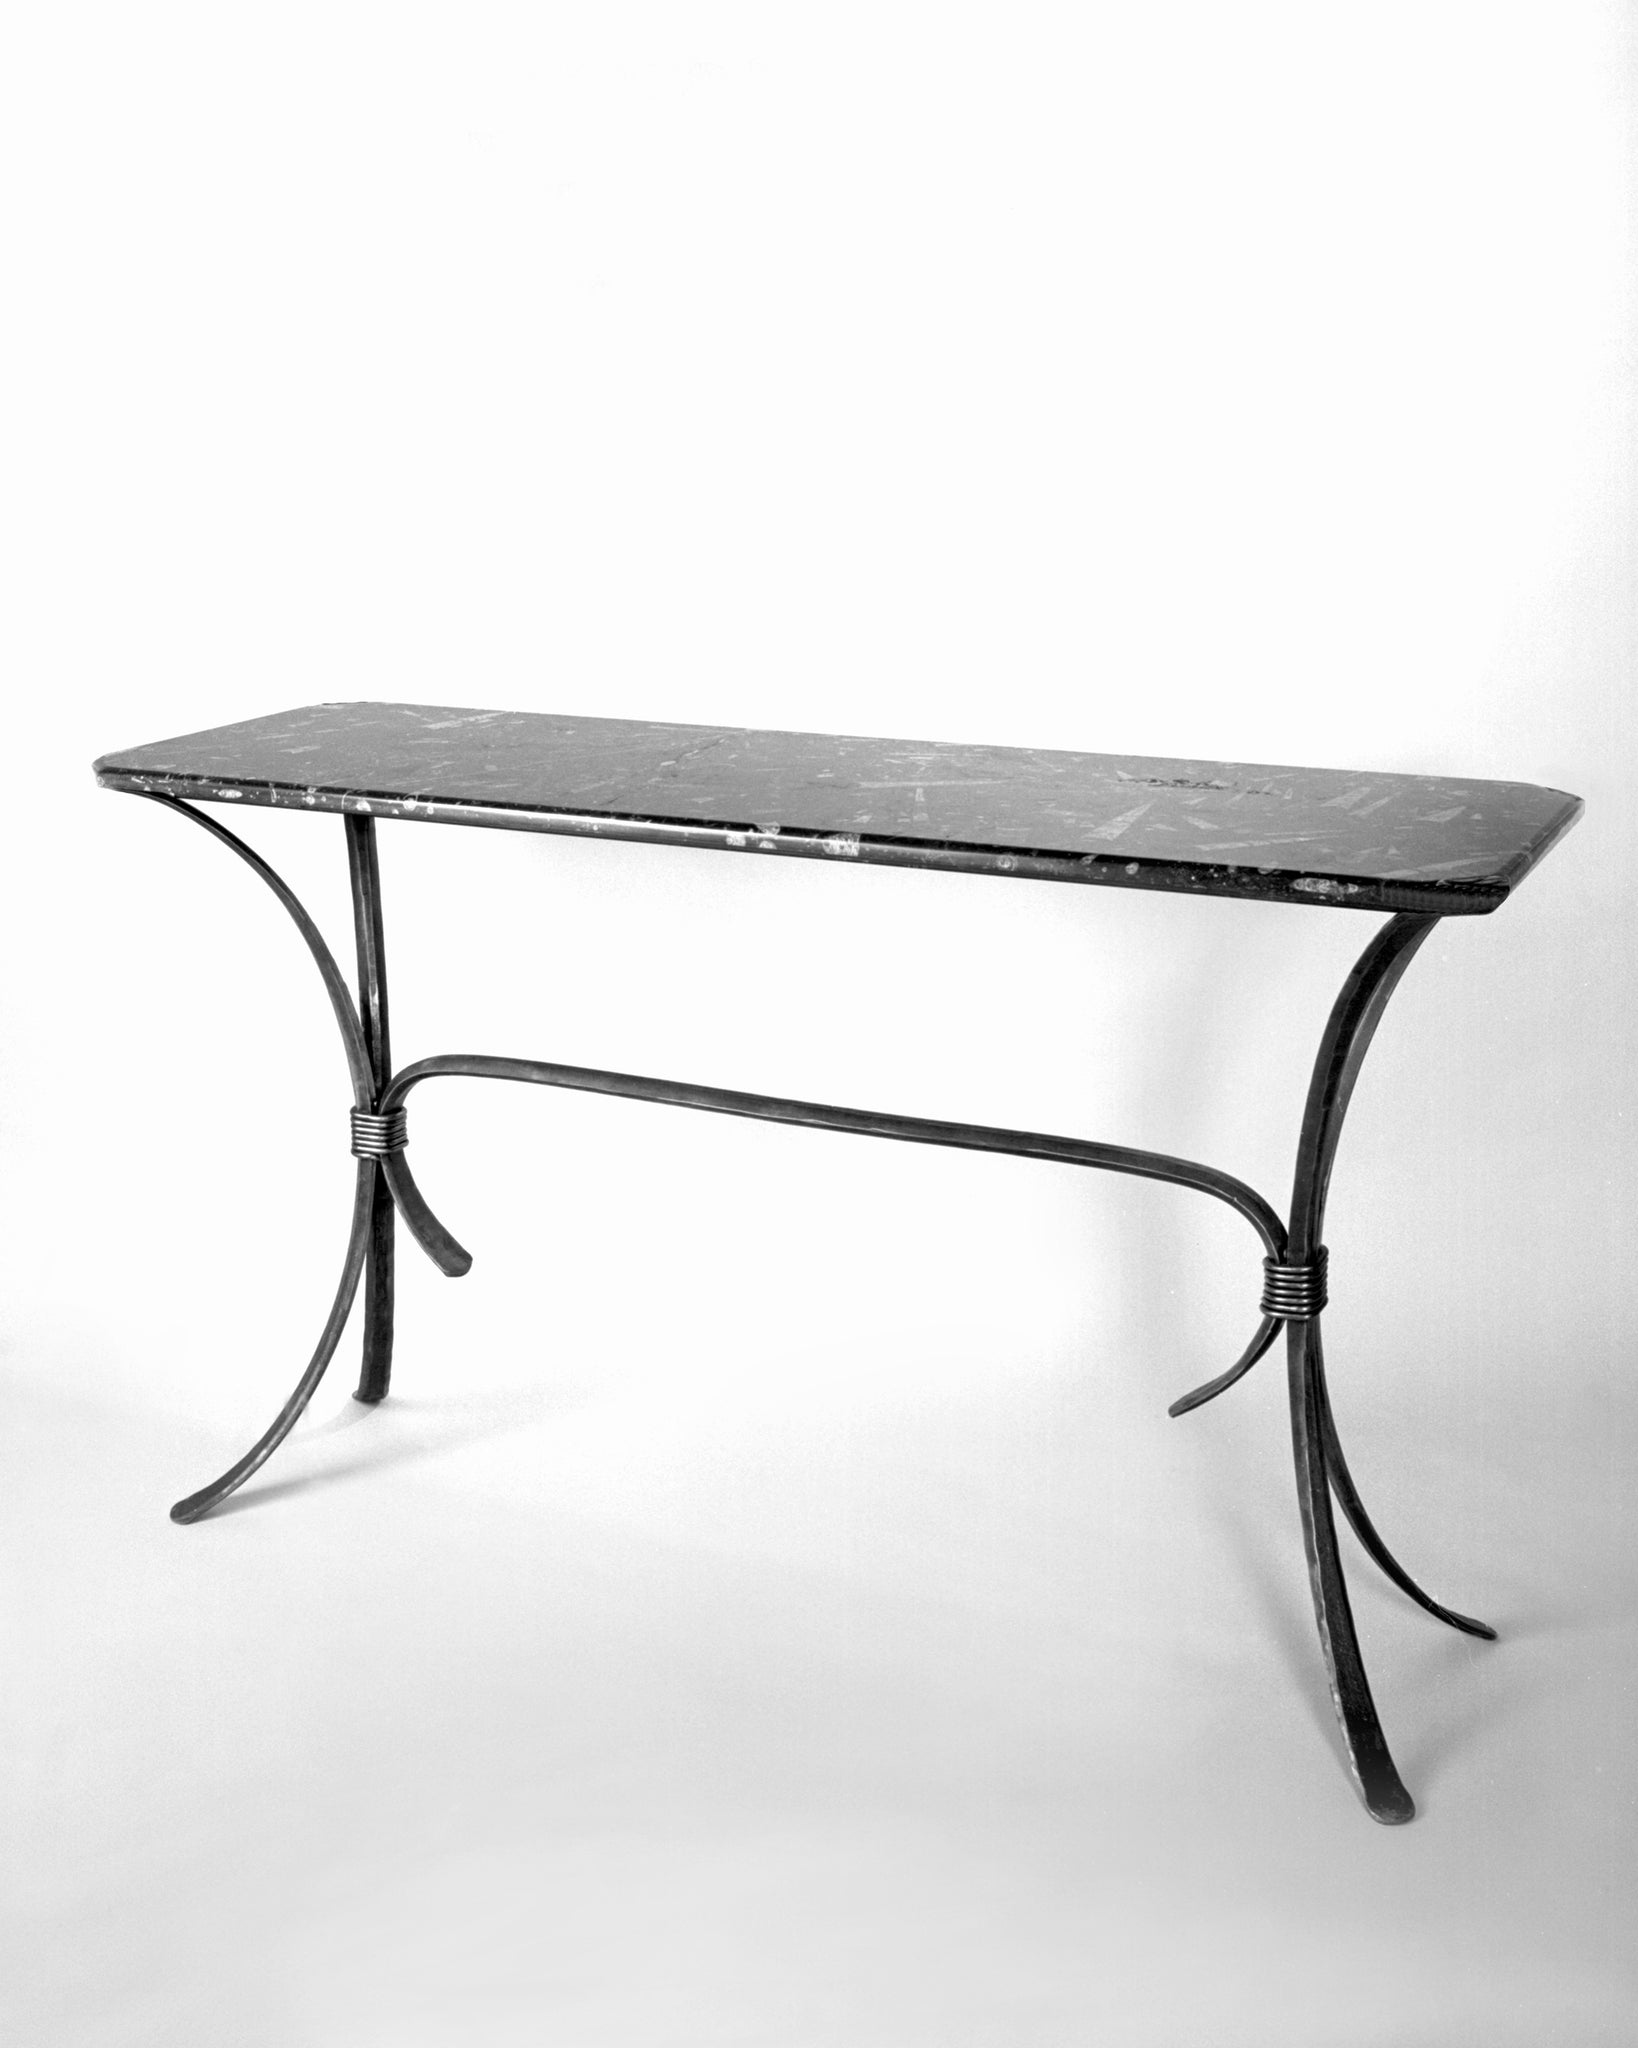 Rustic, hand forged wrought iron Sofa Table by Christopher Thomson Ironworks.